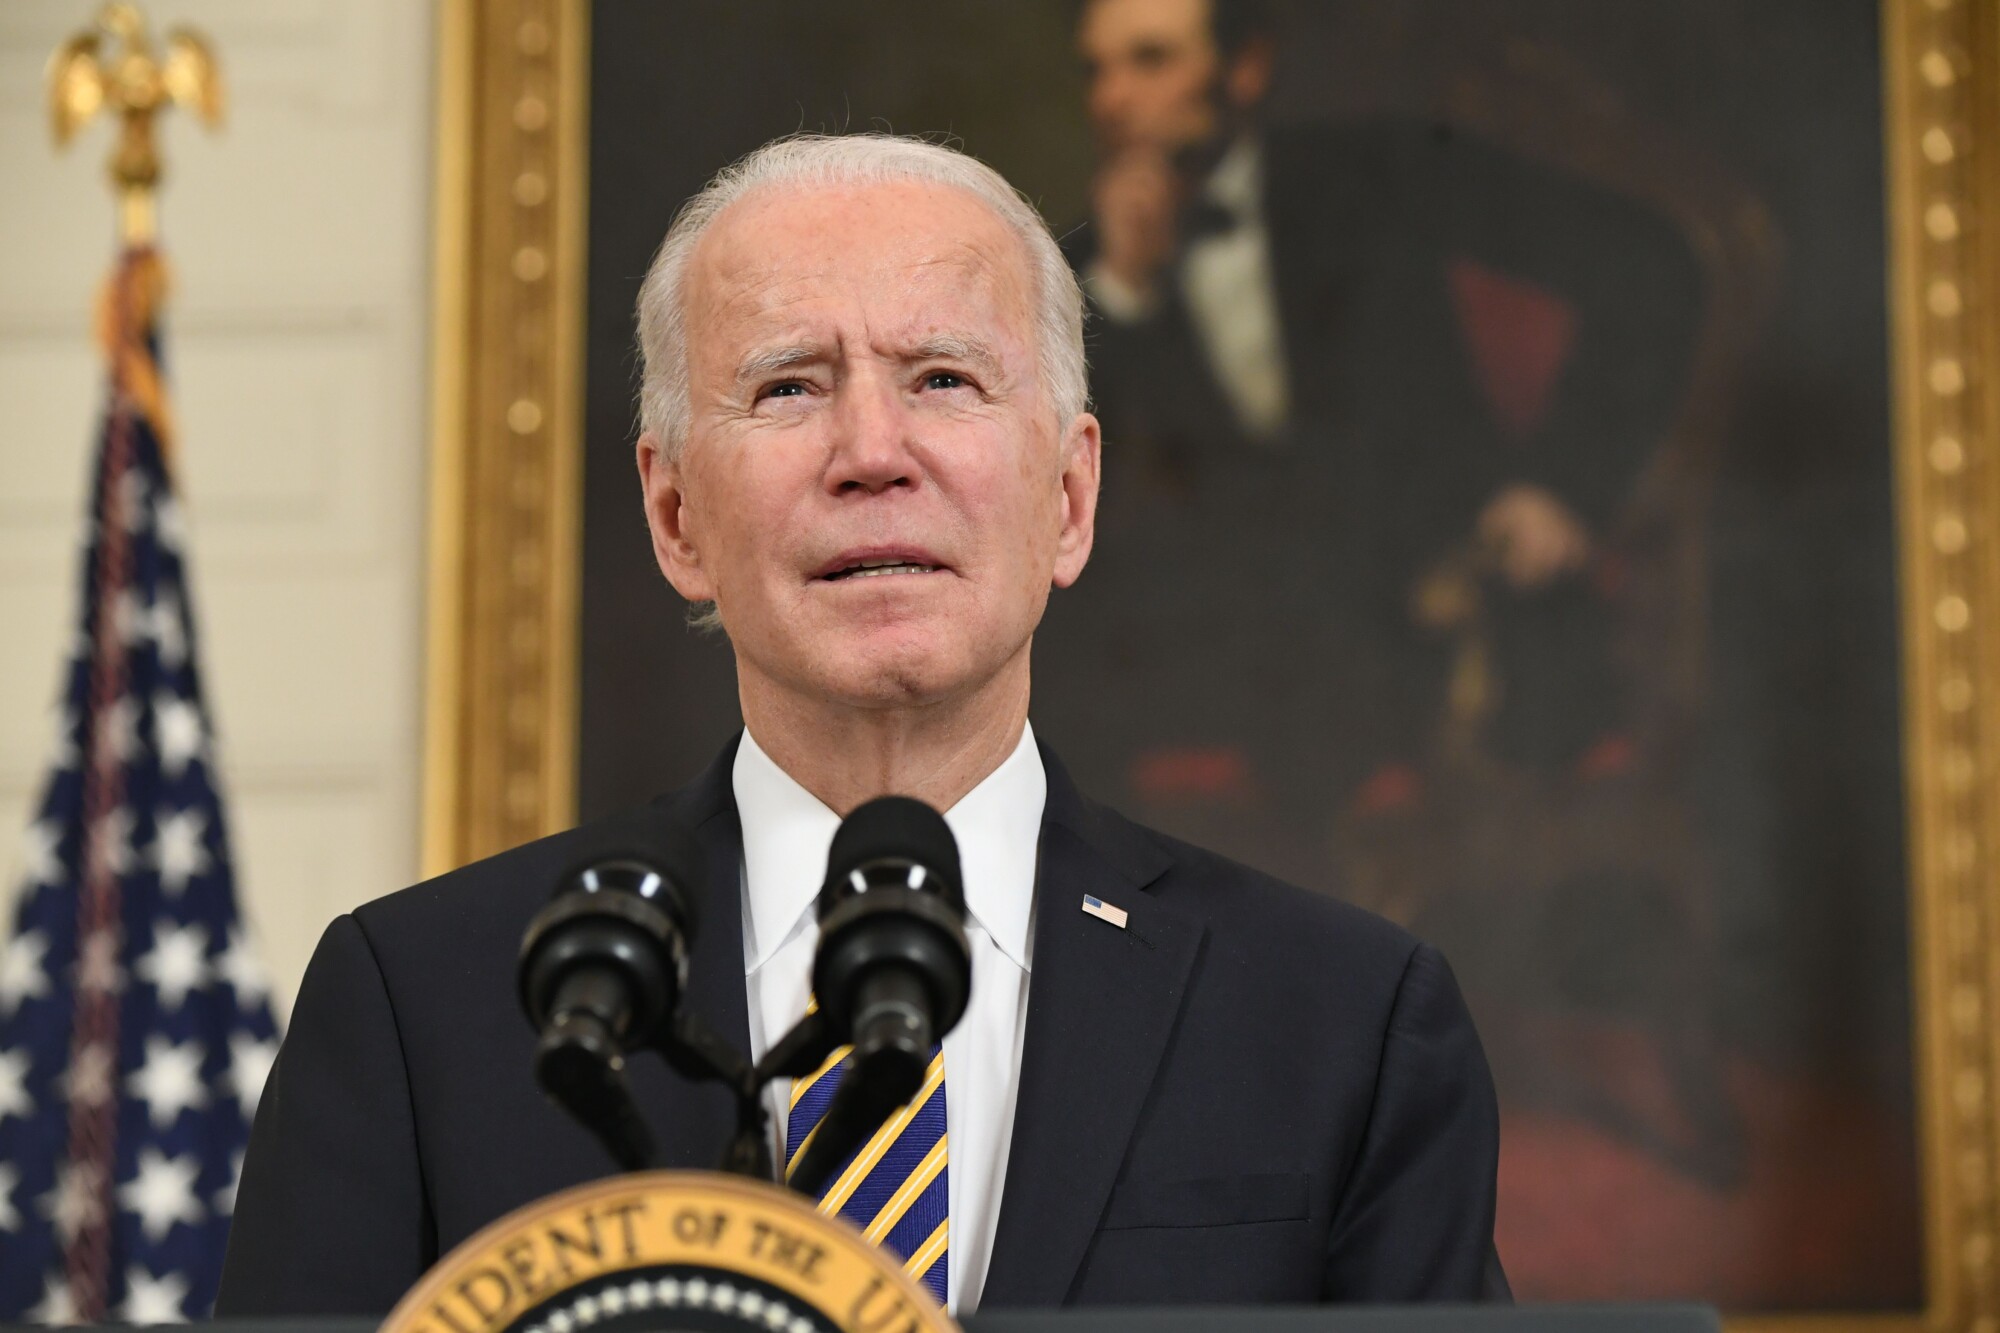 Biden Signs Executive Order to Review Supply Chains